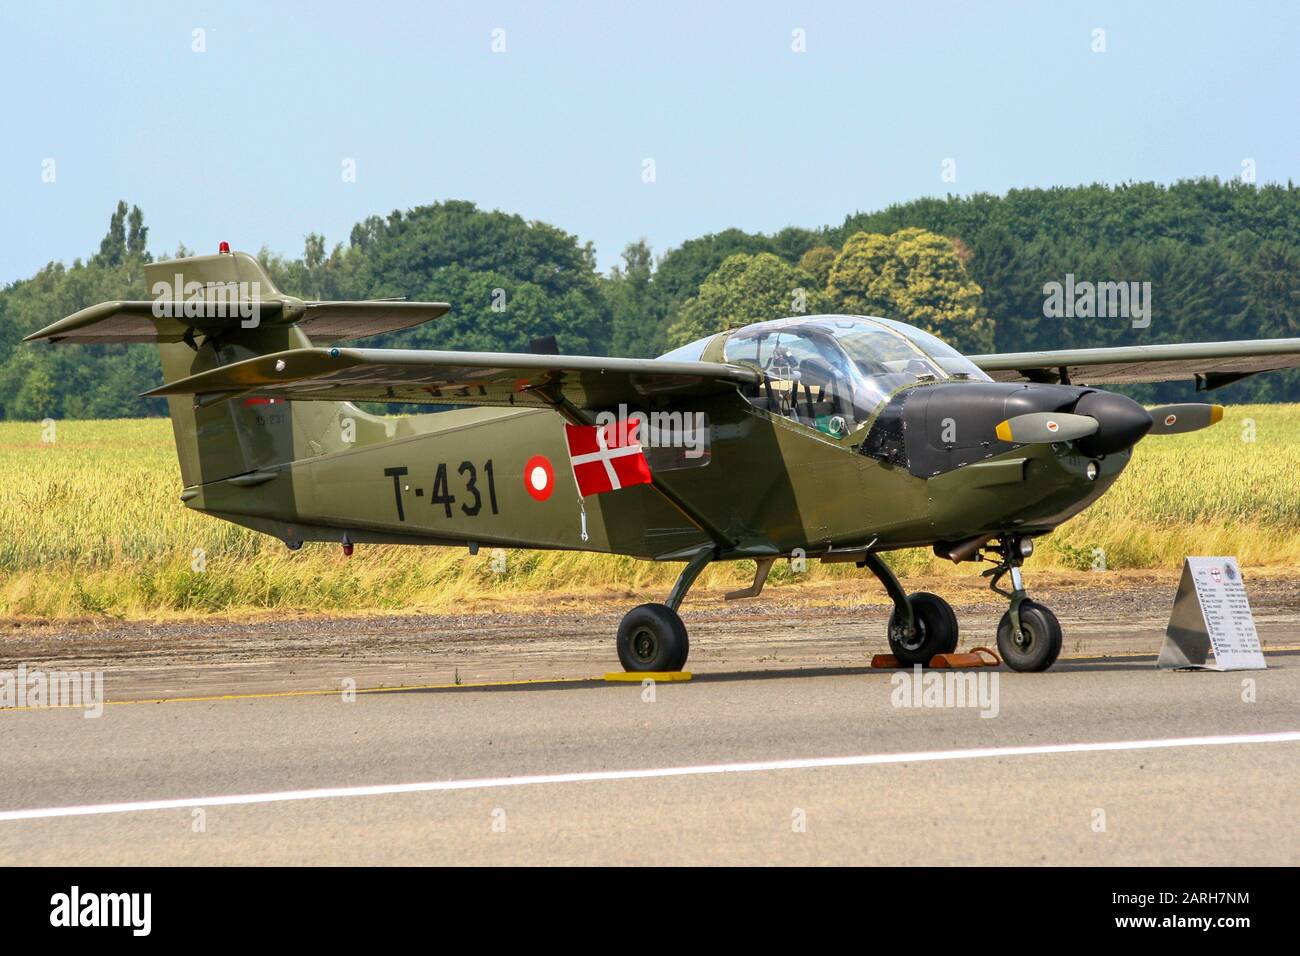 BEAUVECHAIN, BELGIUM - JUL 3, 2010: Royal Danish Air Force Saab T-17 Supporter training aircraft on the tarmac of Beauvechain airbase. Stock Photo